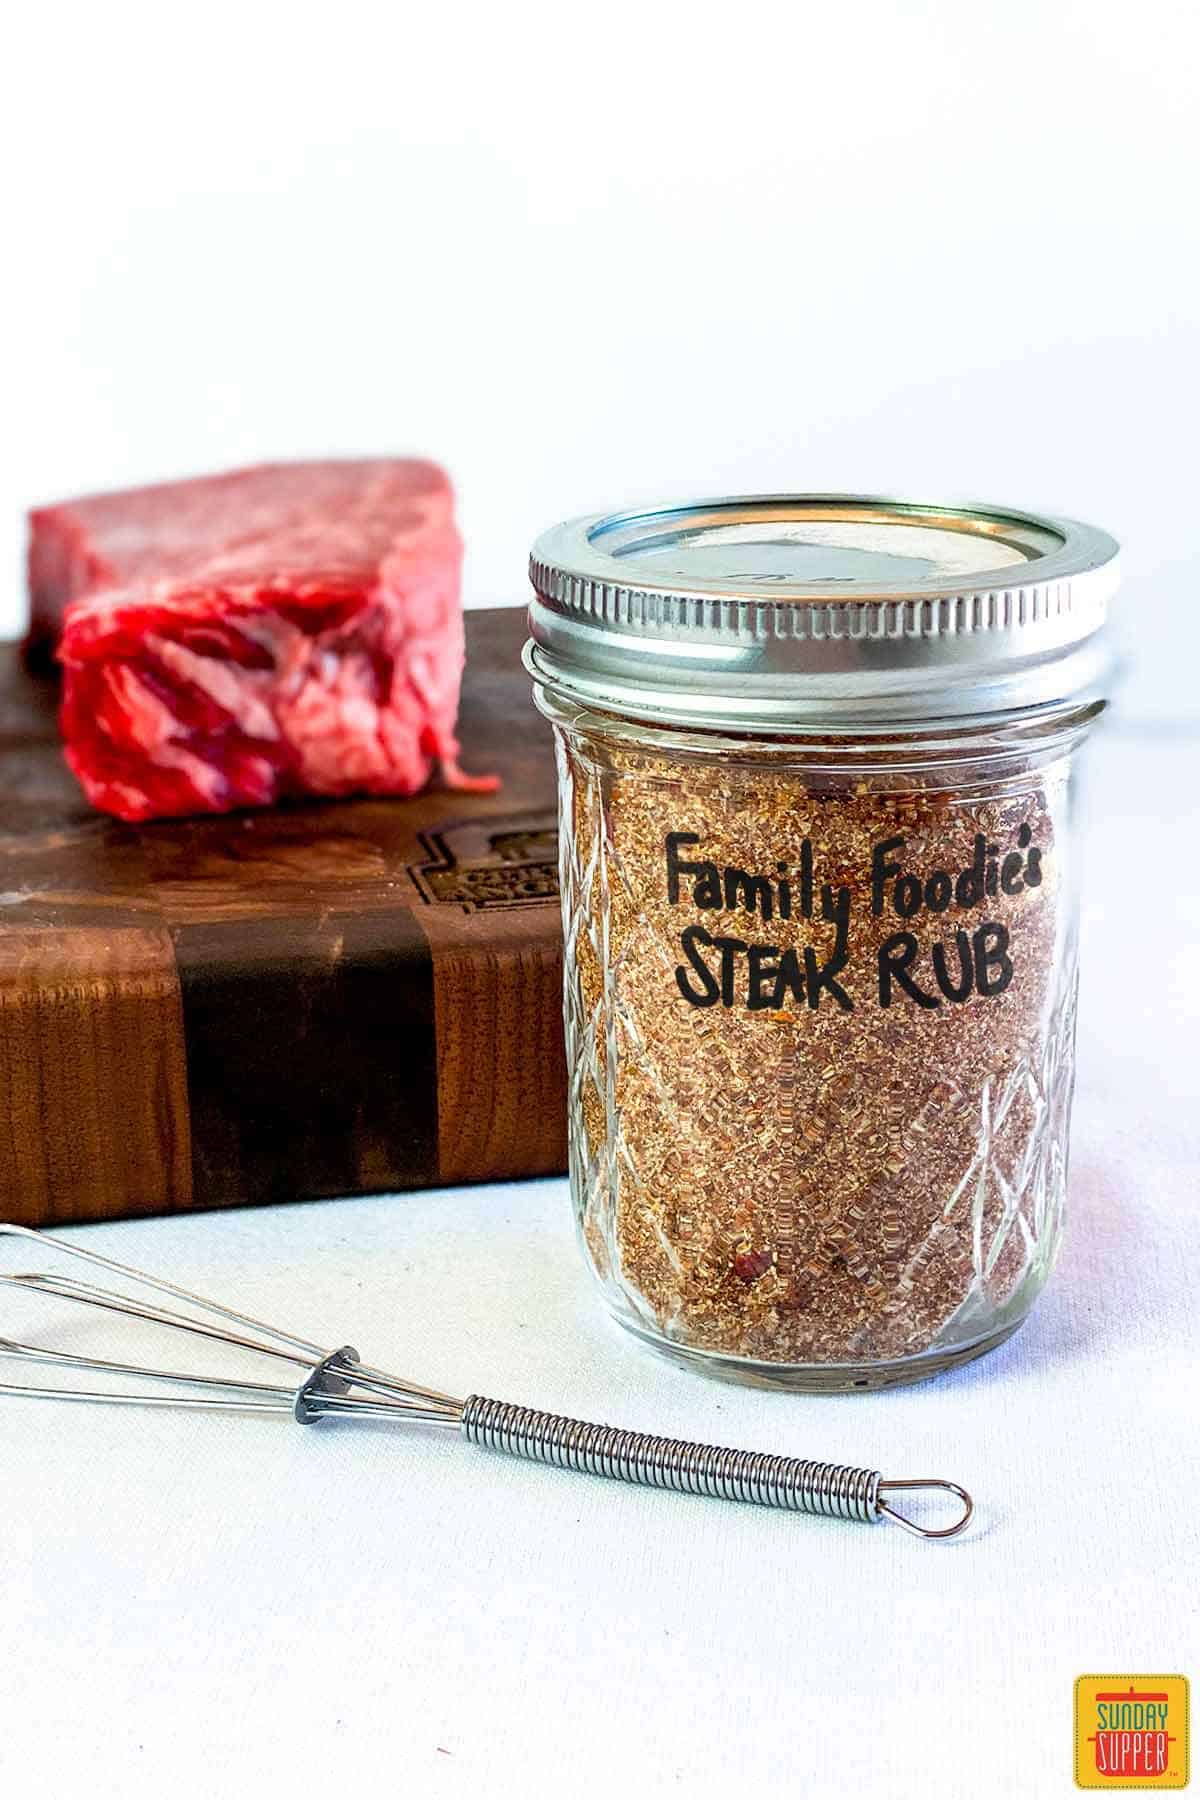 Dry rub for steak seasoning in a mason jar in front of a cutting board with a beef short rib